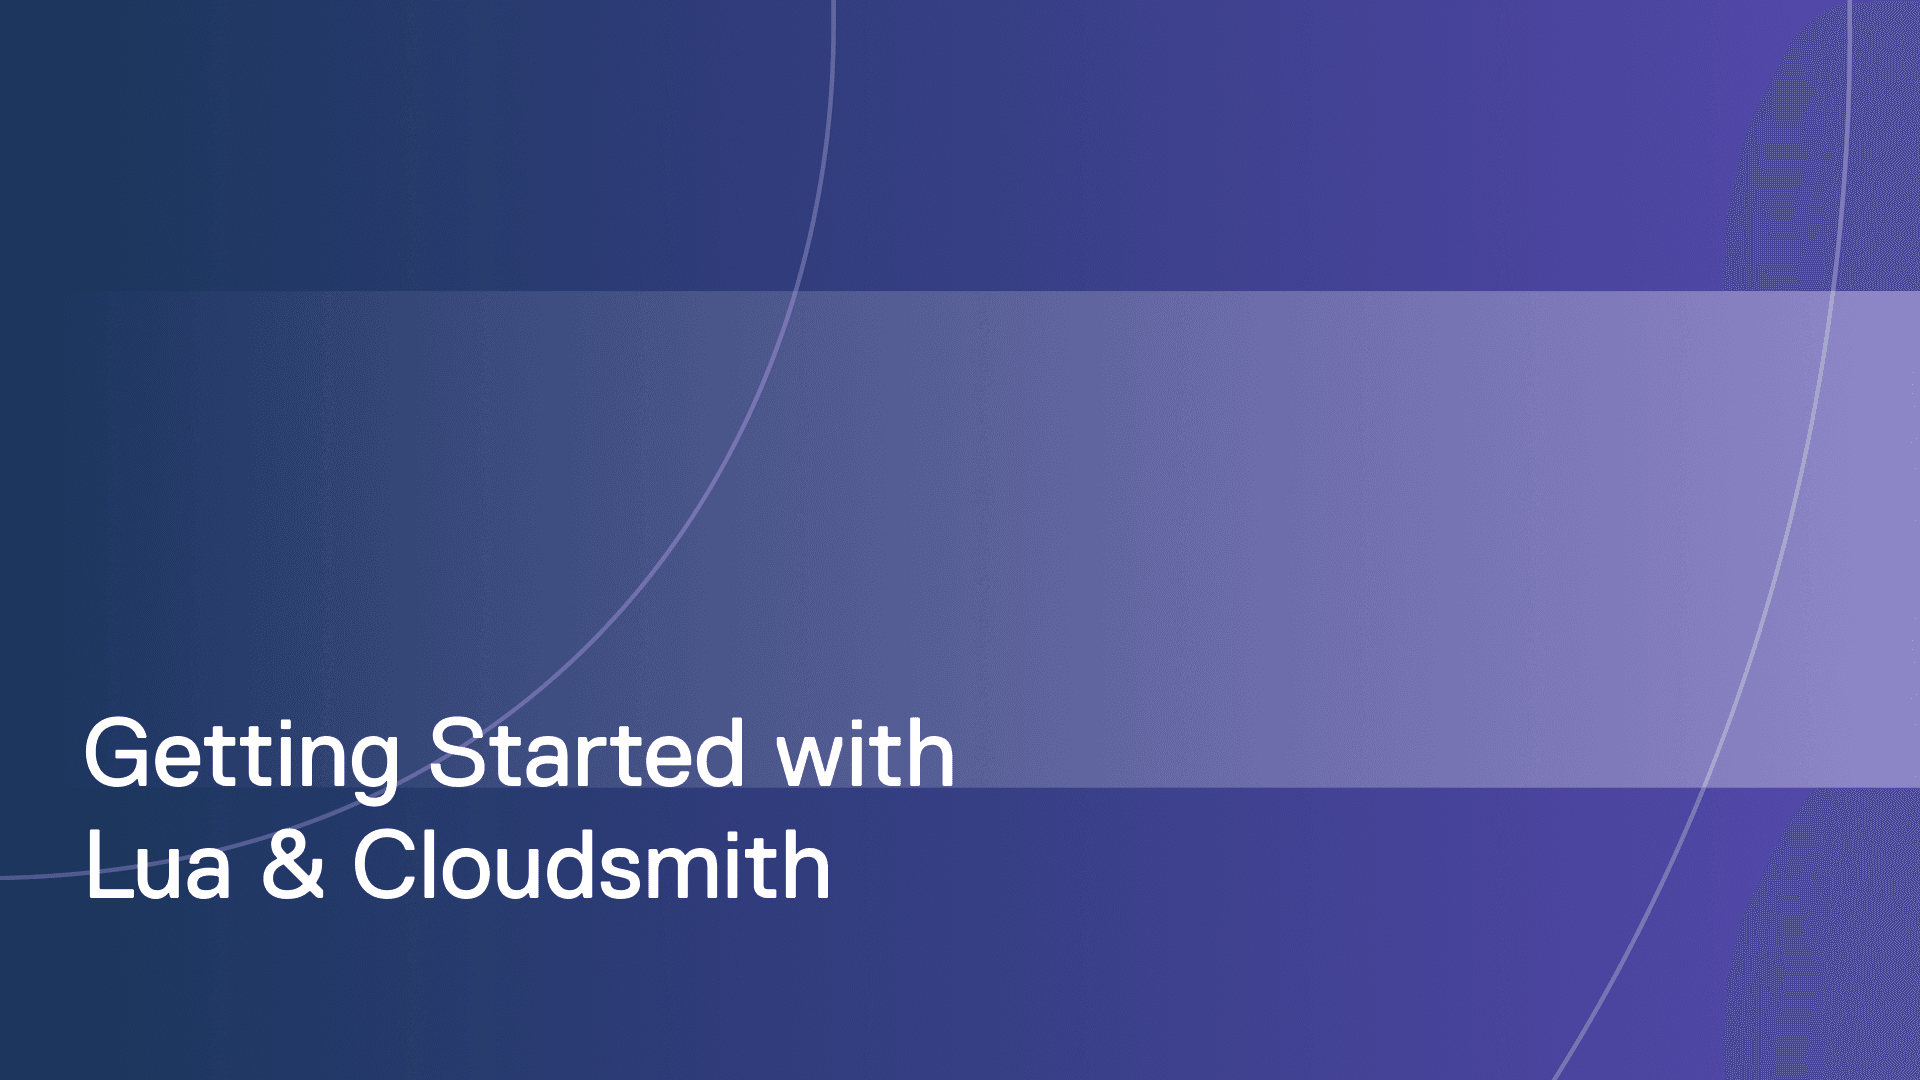 Getting started with Lua and Cloudsmith